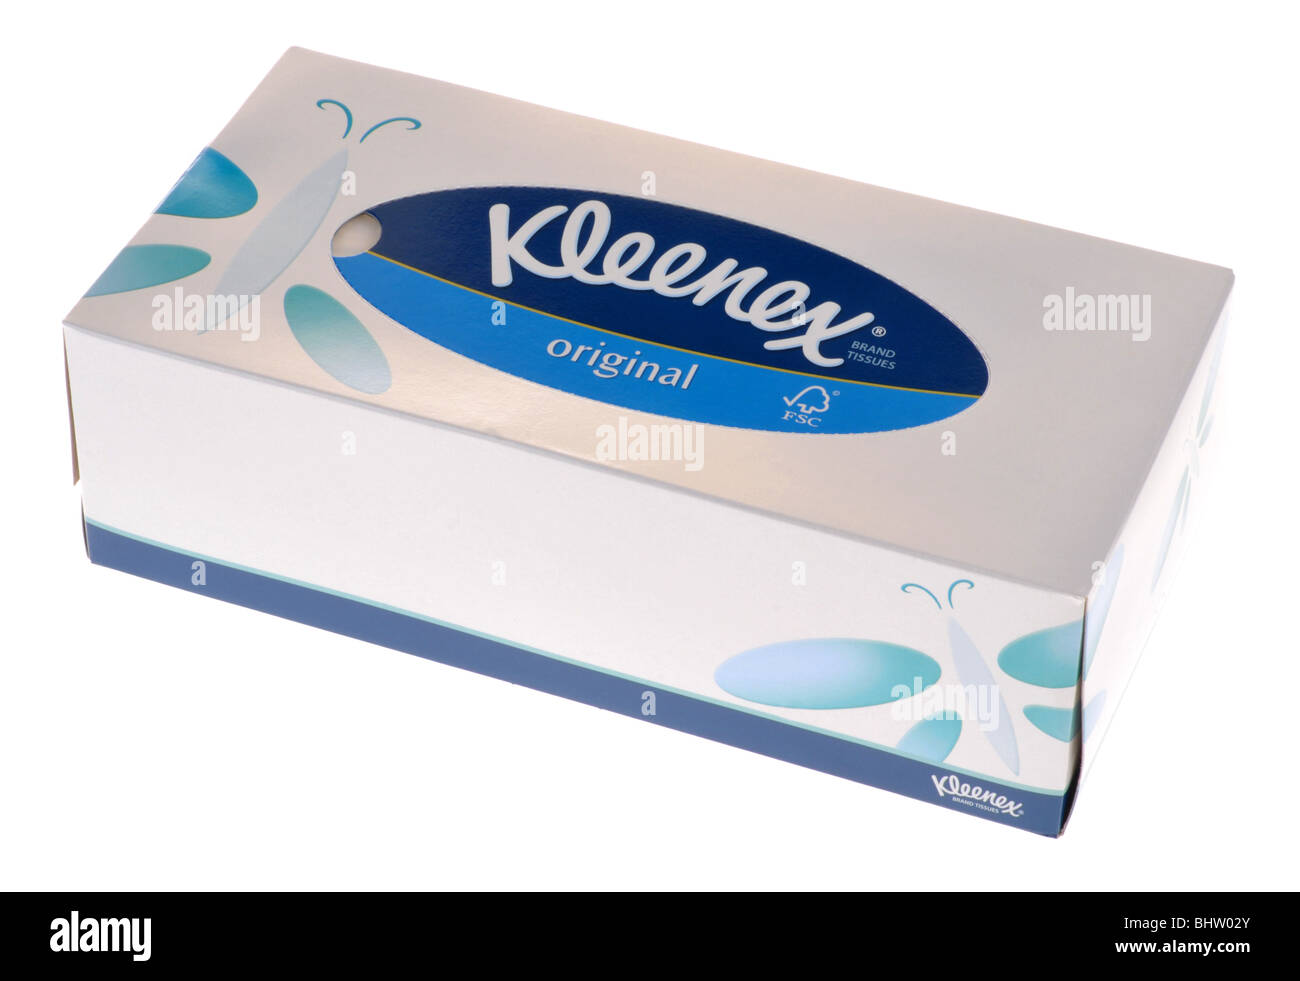 box of tissues pic